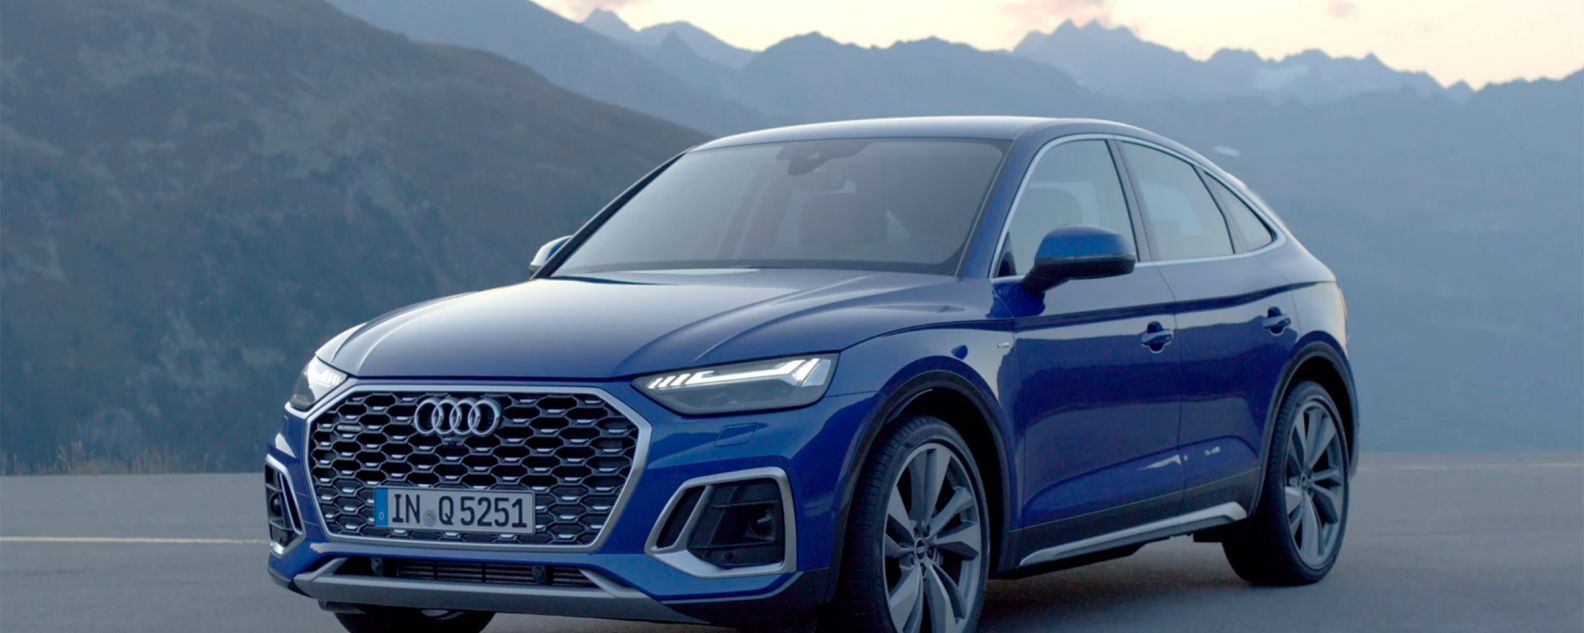 Blue Audi Q5 Sportback displayed against mountain background